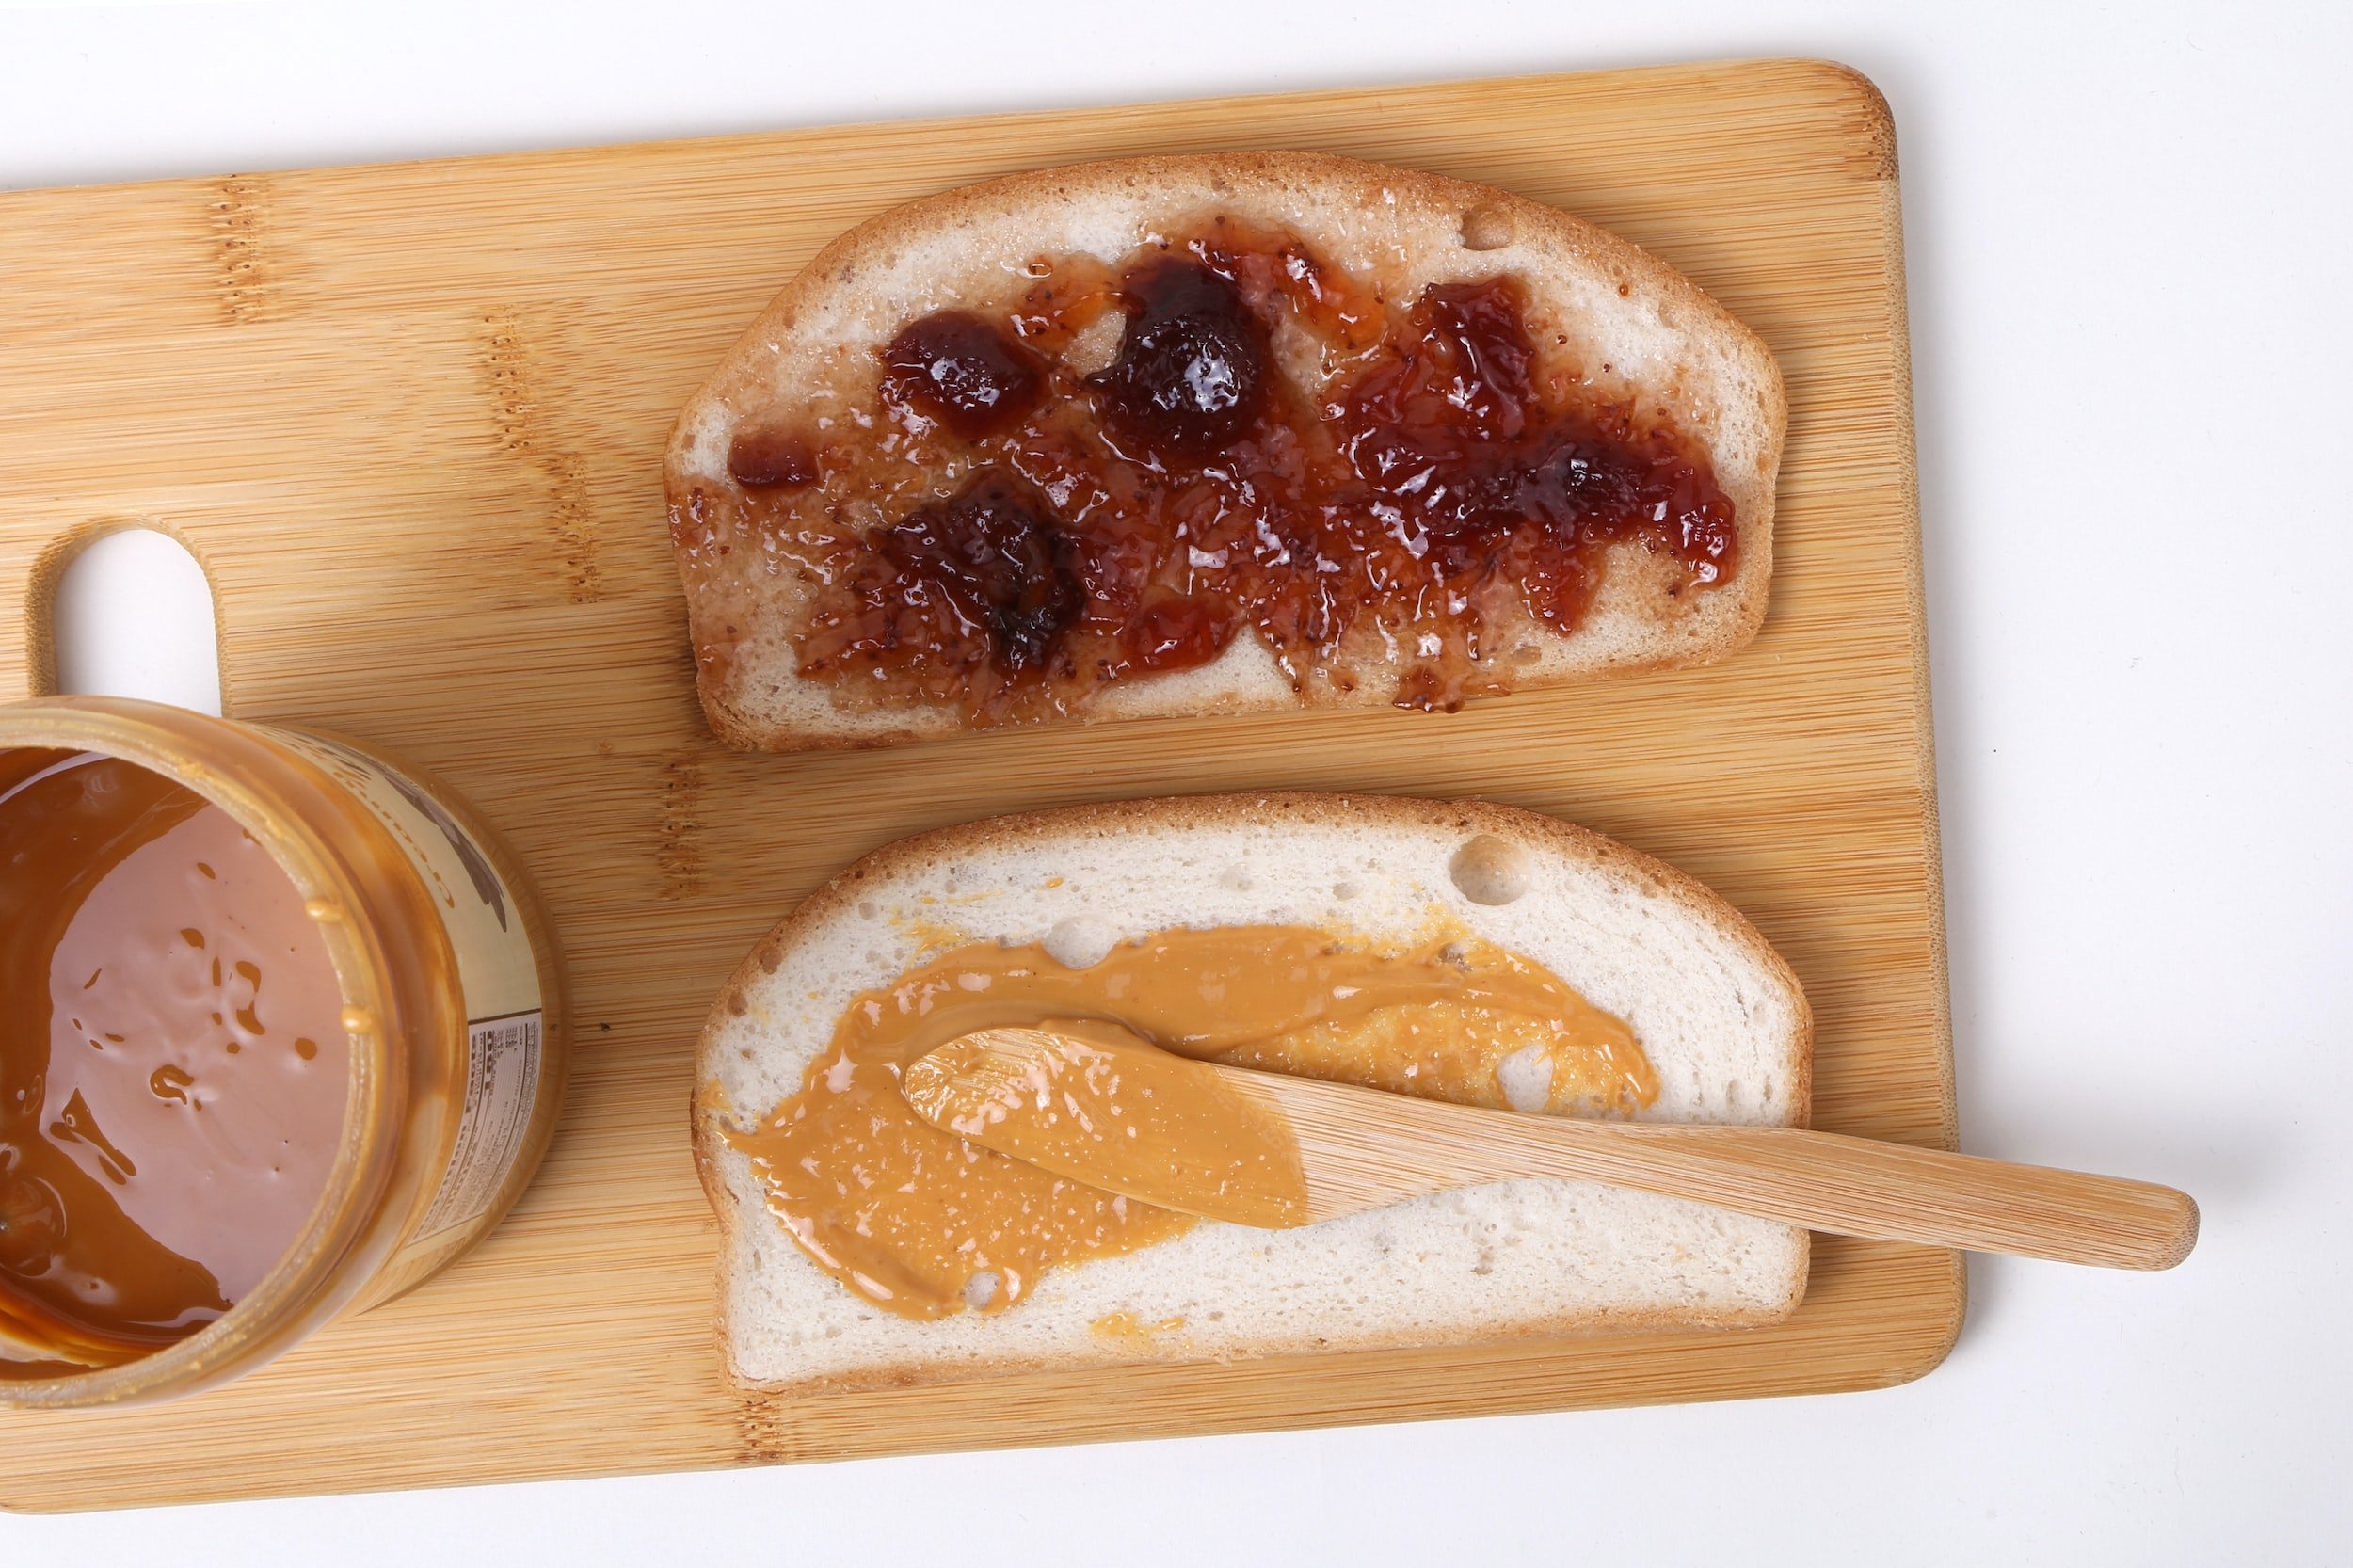 ruby port peanut butter and jelly sandwich